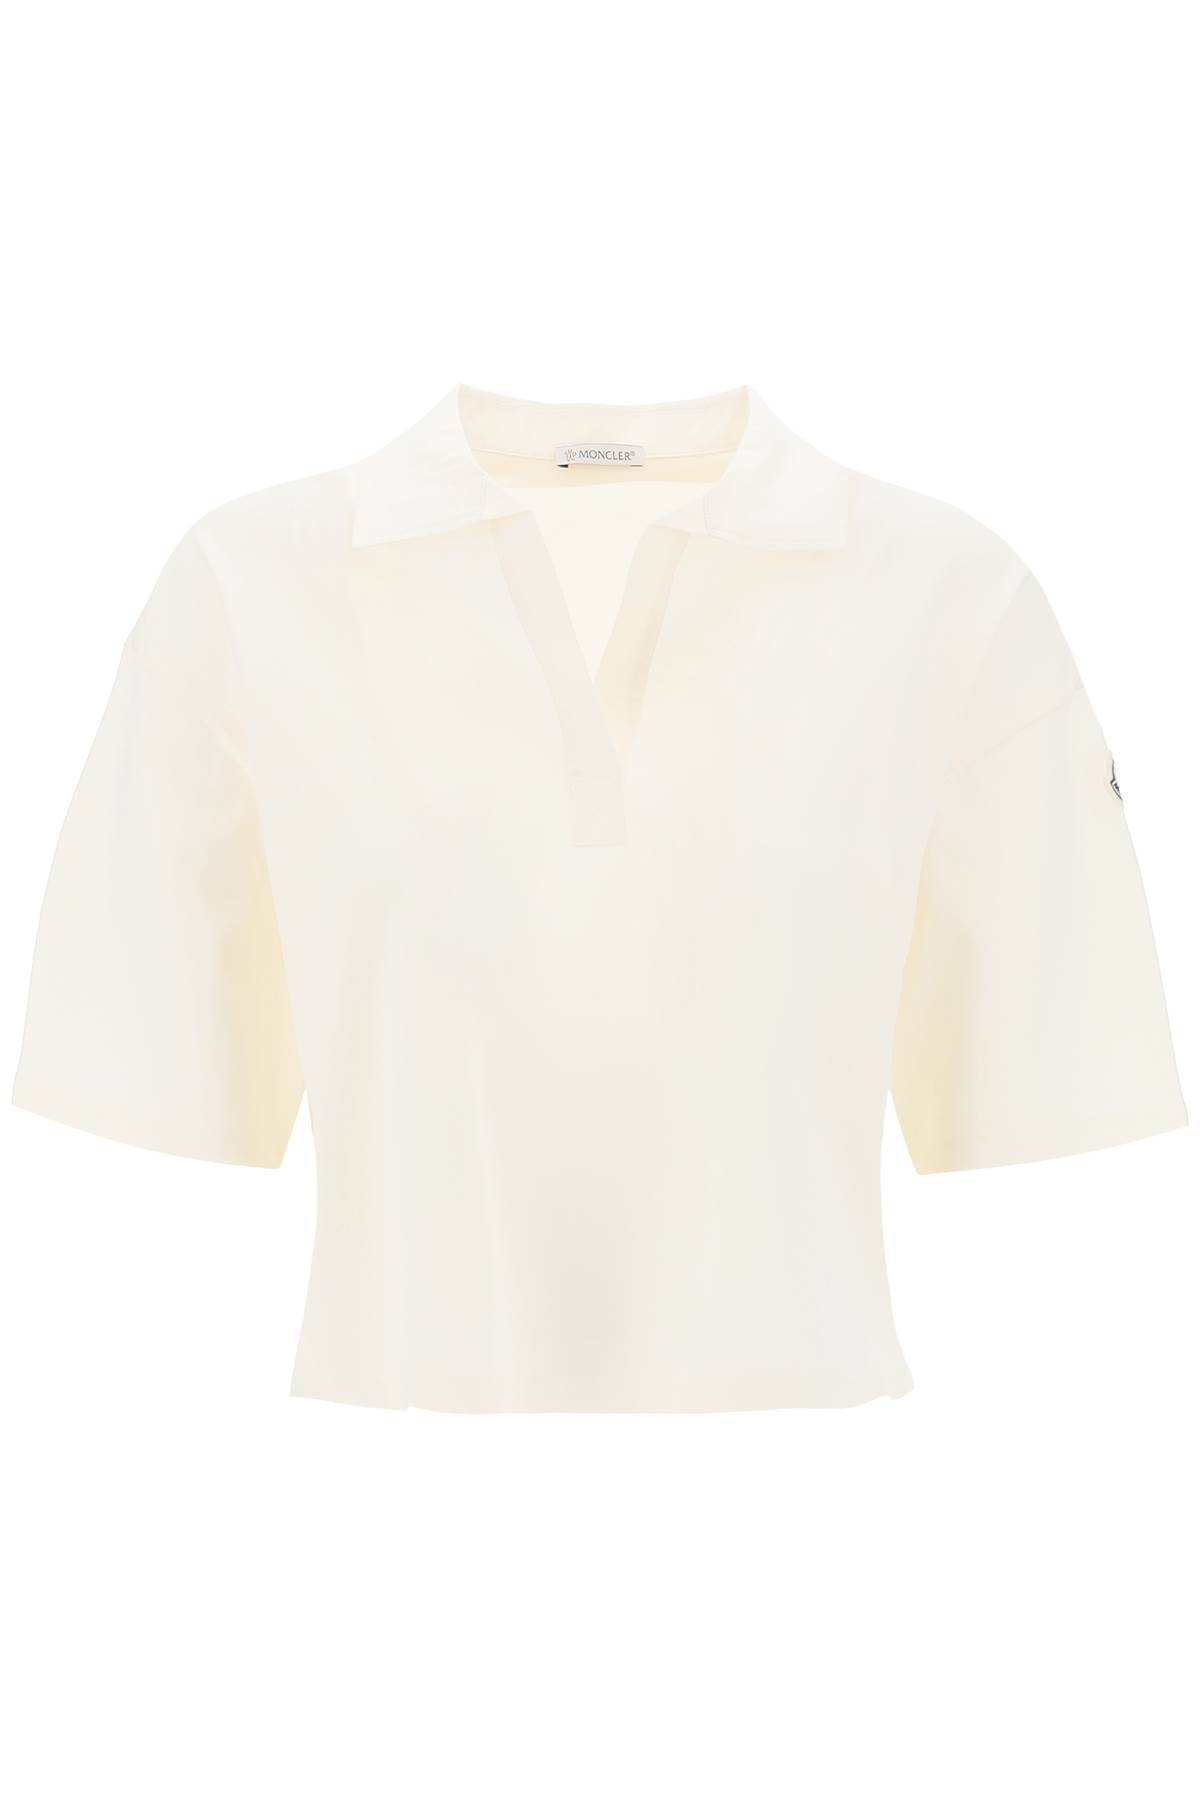 Moncler MONCLER polo shirt with poplin inserts